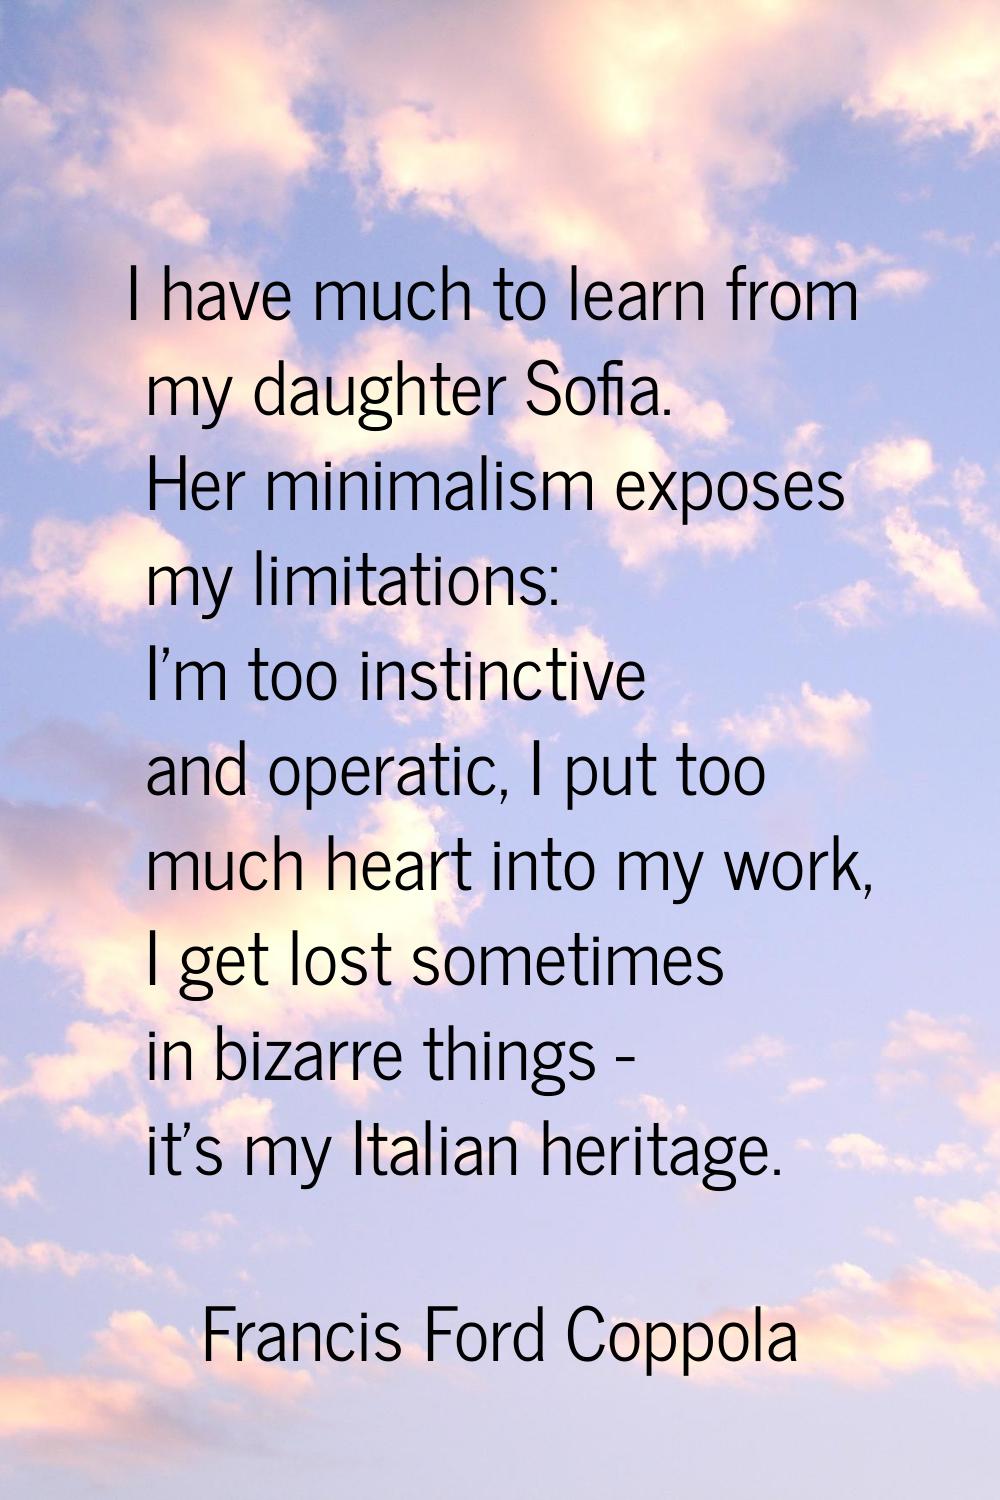 I have much to learn from my daughter Sofia. Her minimalism exposes my limitations: I'm too instinc